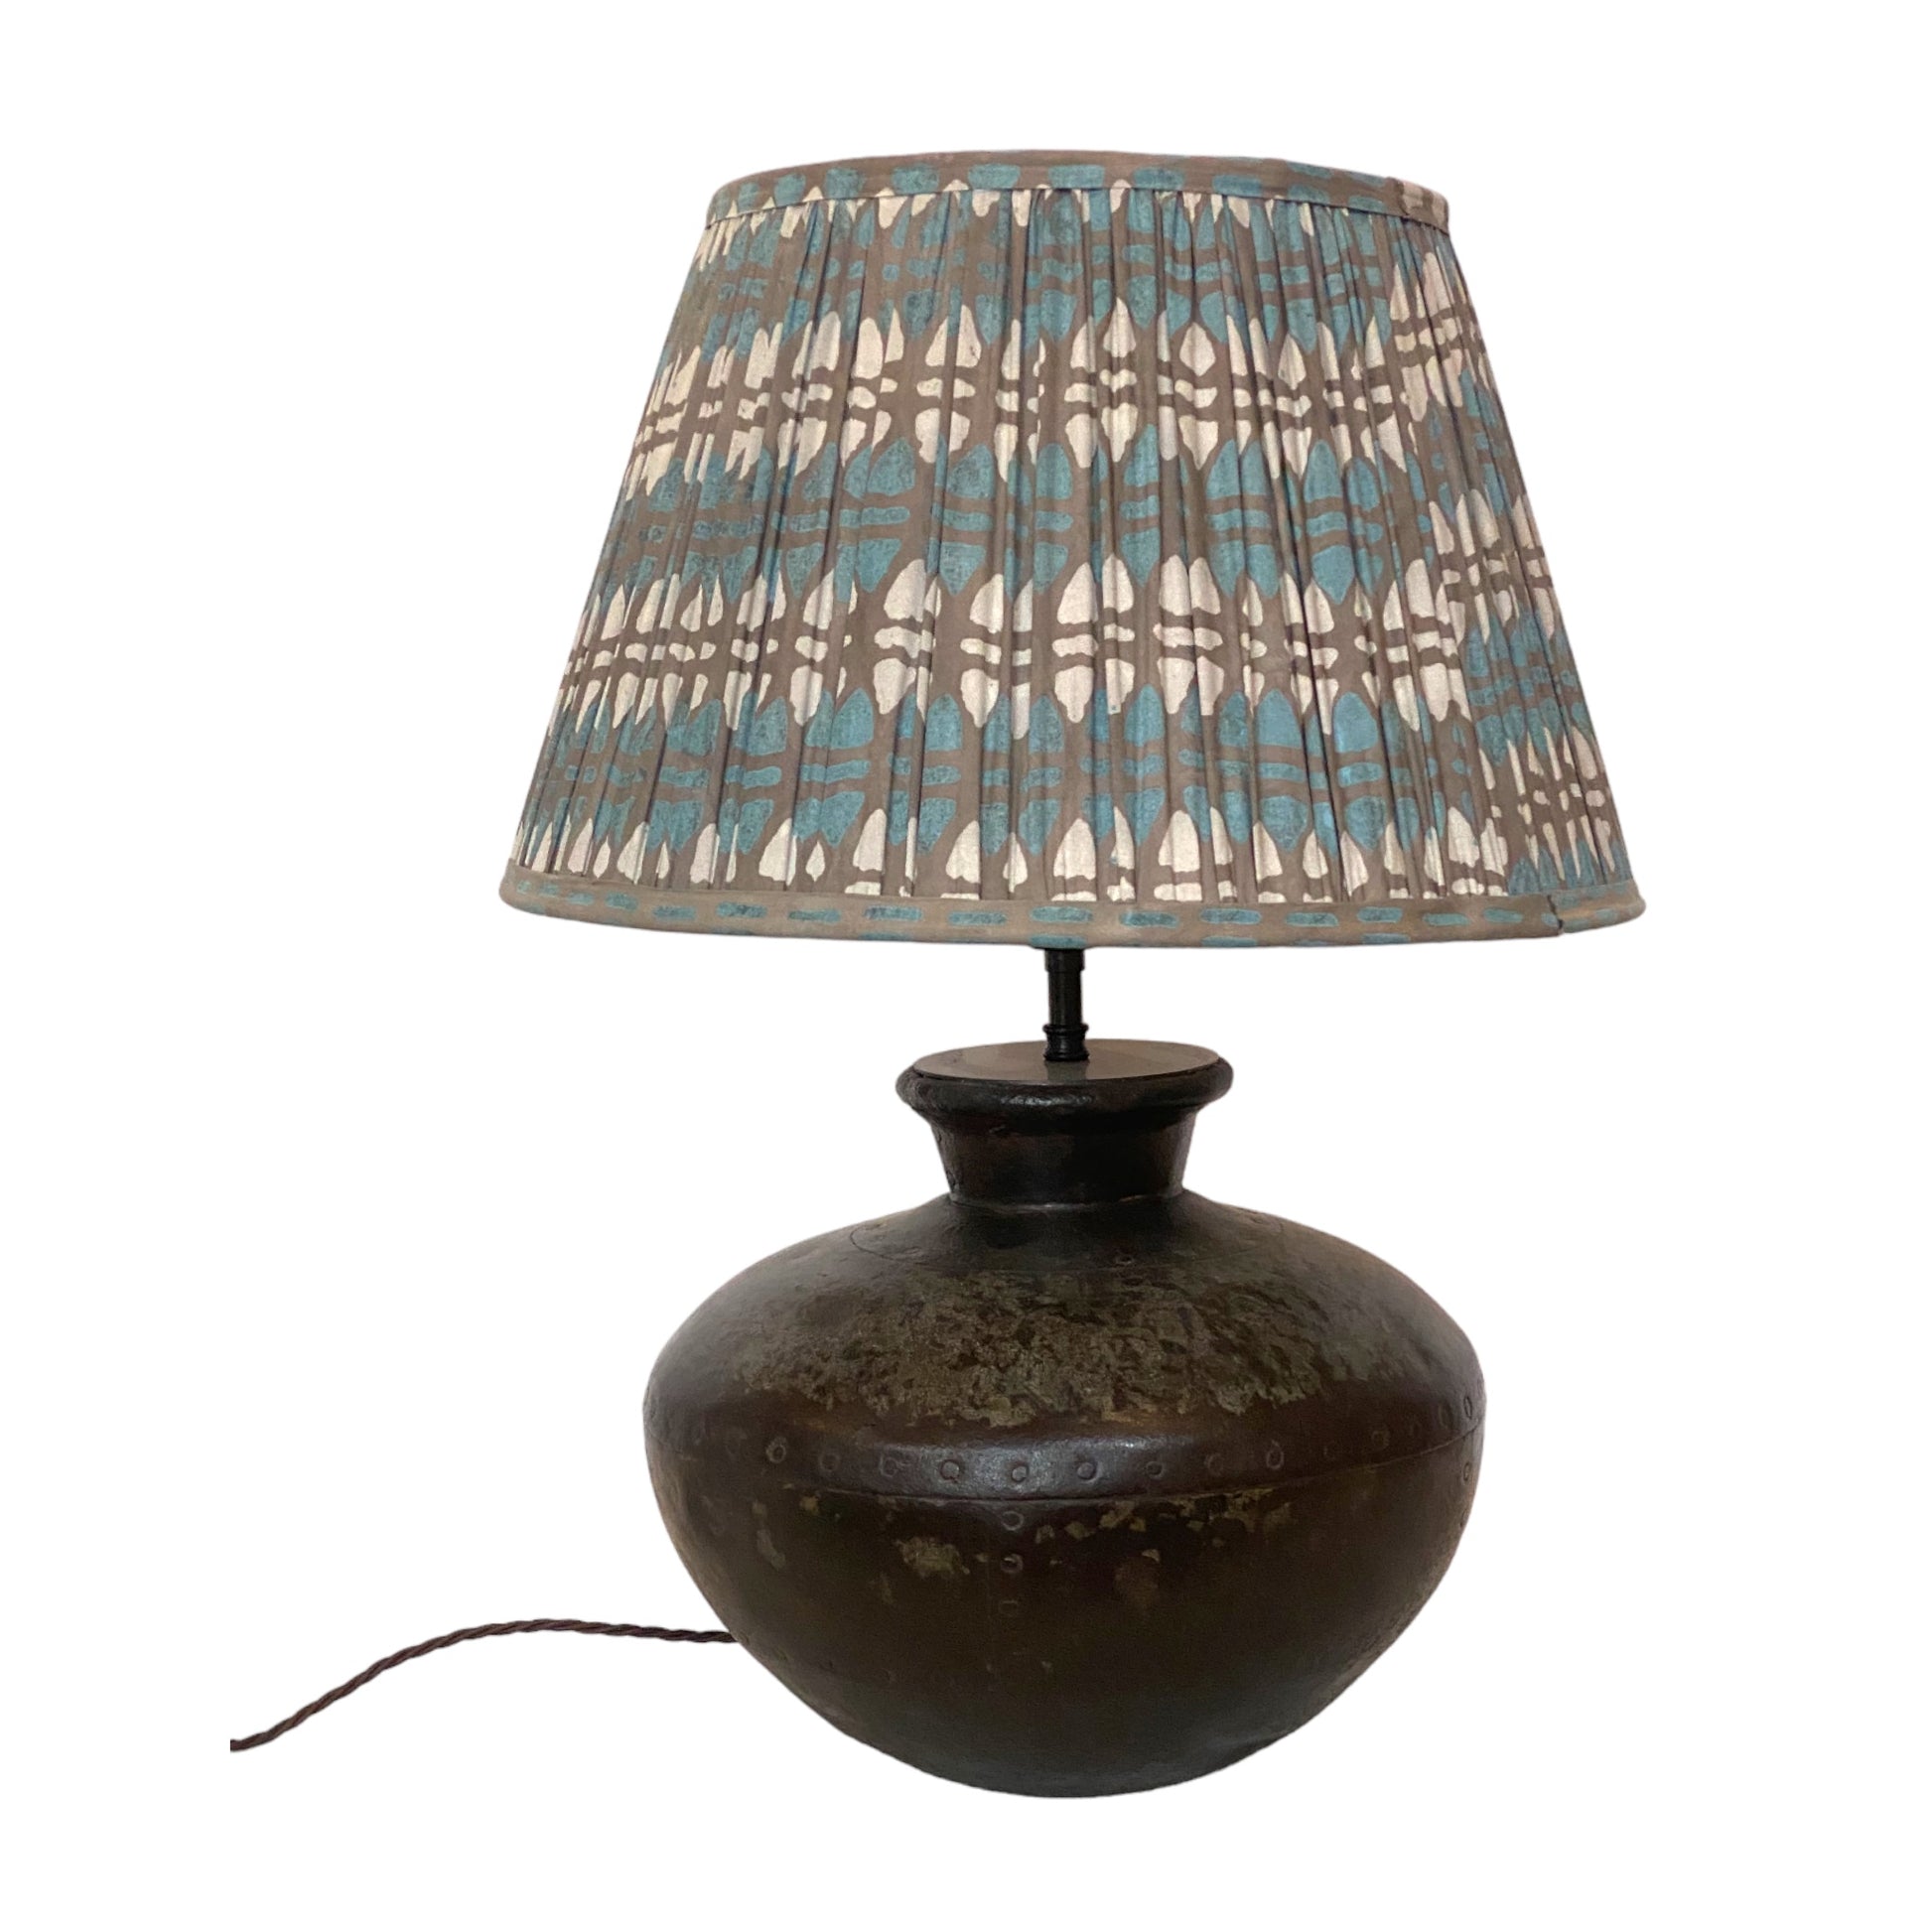 Water carrier lamp base